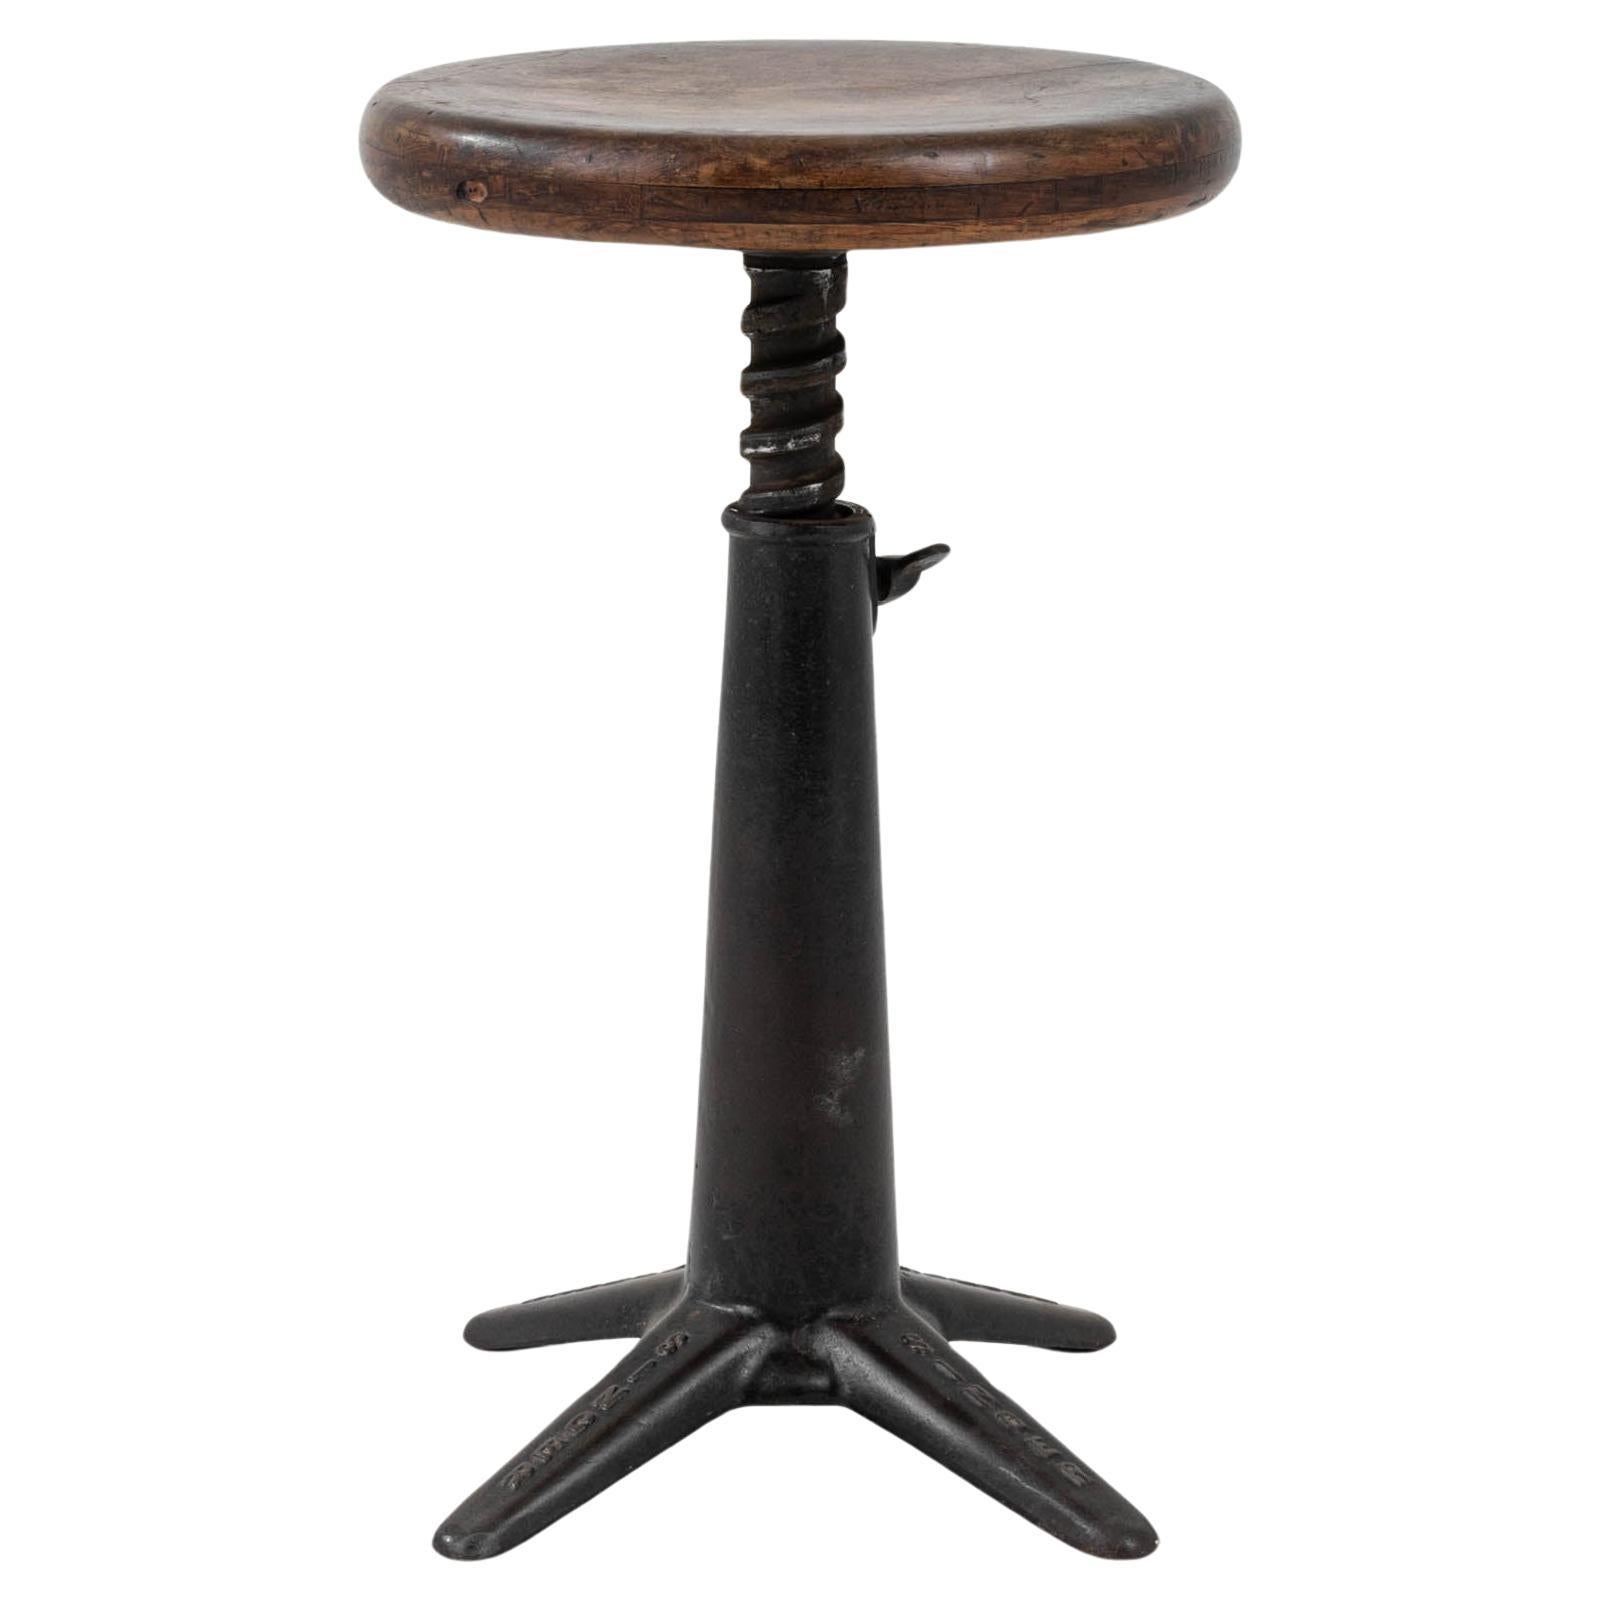 20th Century French Metal Swivel Stool With Wooden Seat